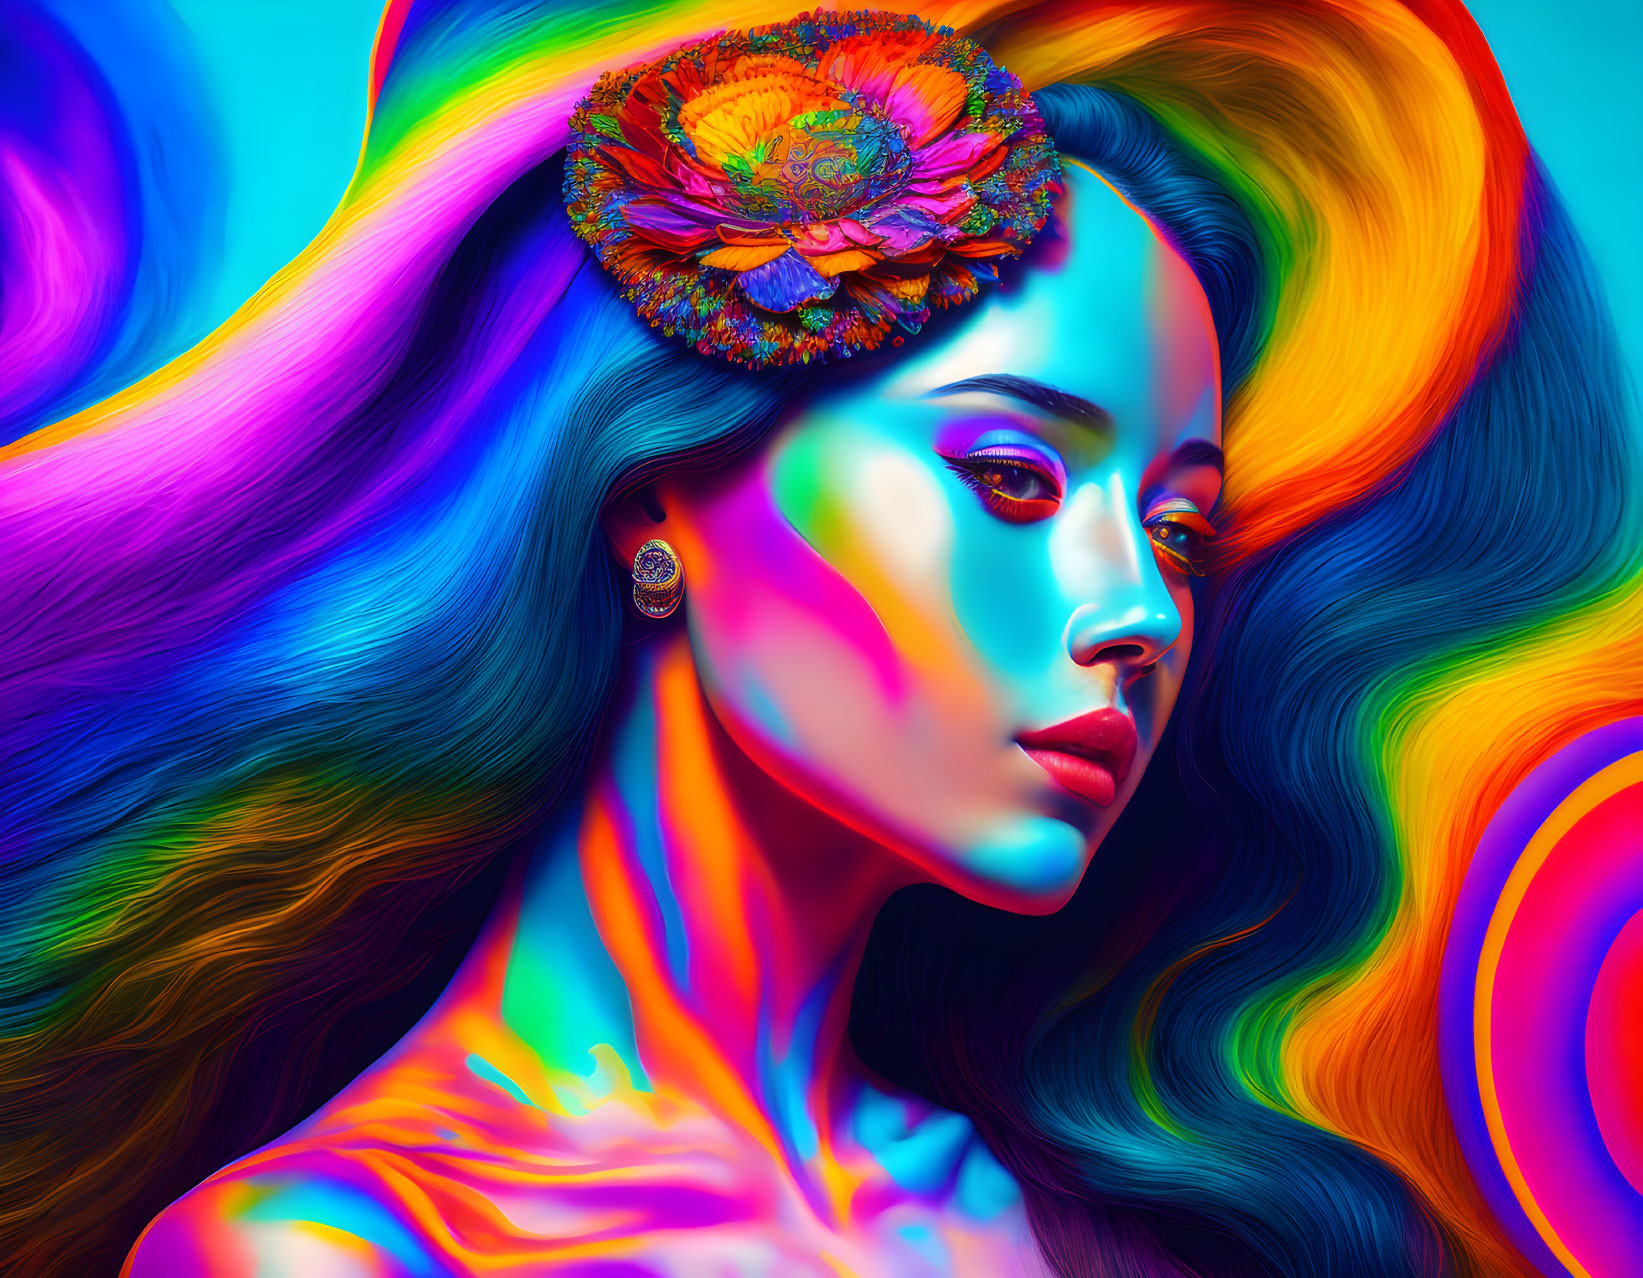 Colorful Digital Artwork: Woman with Flowing Hair and Multicolored Lighting